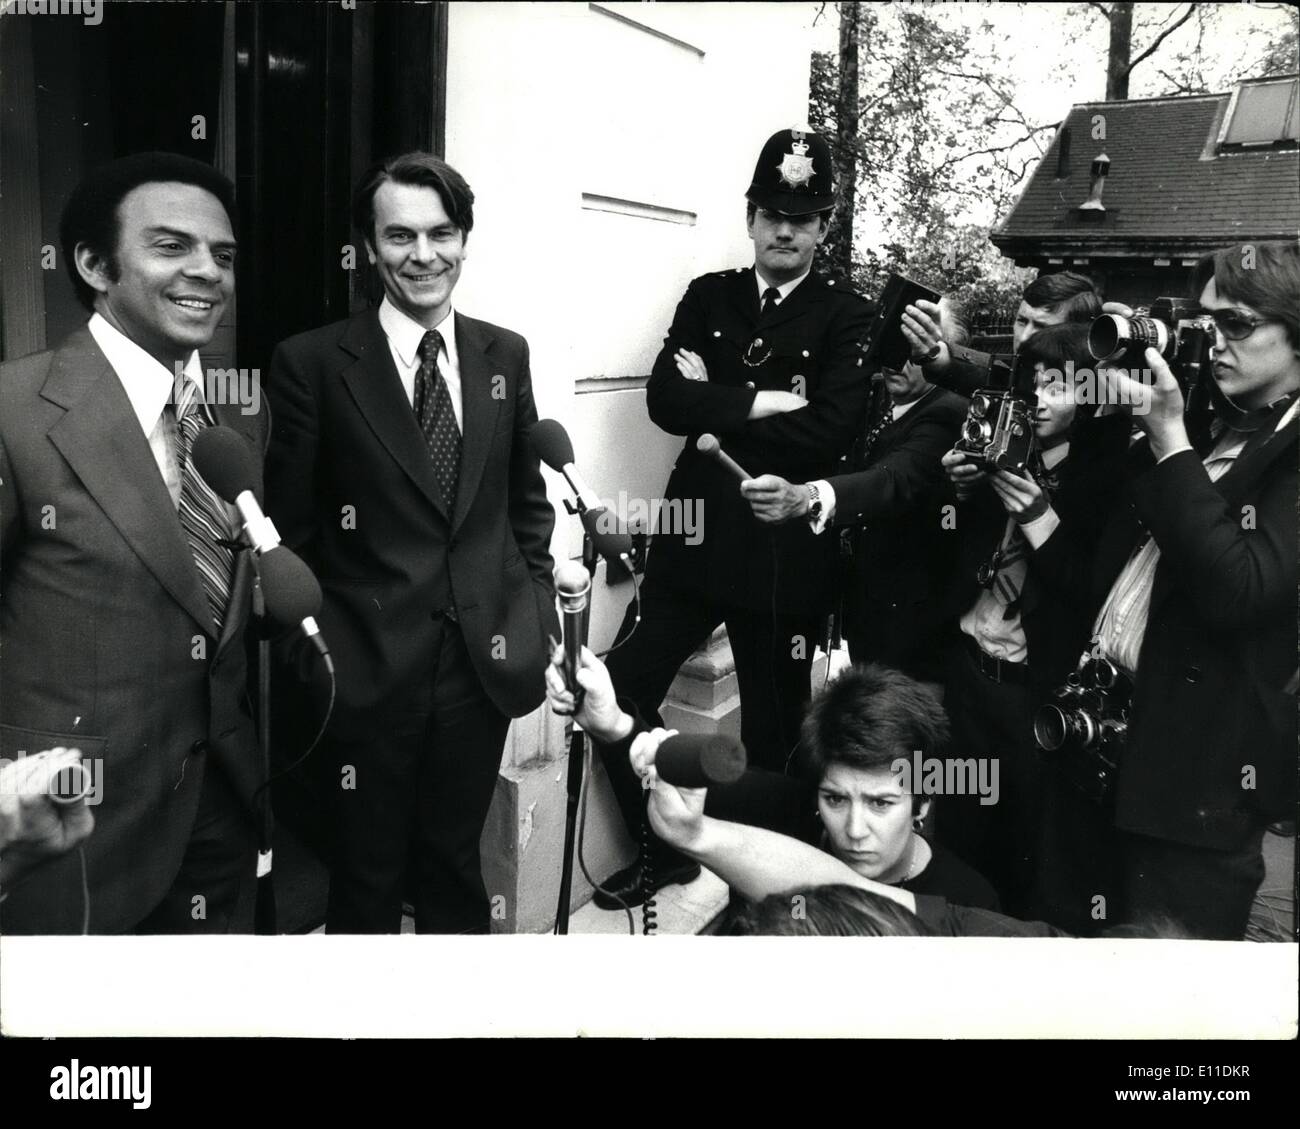 May 05, 1977 - Andrew Young the American Ambassador to the U.N. calls on Dr Owen for Breakfast: Mr Andrew Young the American Ambassador ti the United Nations,met Dr David Own the Foreign Secretary over breakfast, at his official residents No 1 Carlton Gardens-He has just arrived back from an eight Nation tour of Africa. Photo shows Mr Andrew Young faced the press outside Carlton Gardens this morning after his working breakfast with Dr David Owen the Foreign Secretary who is looking on. Stock Photo